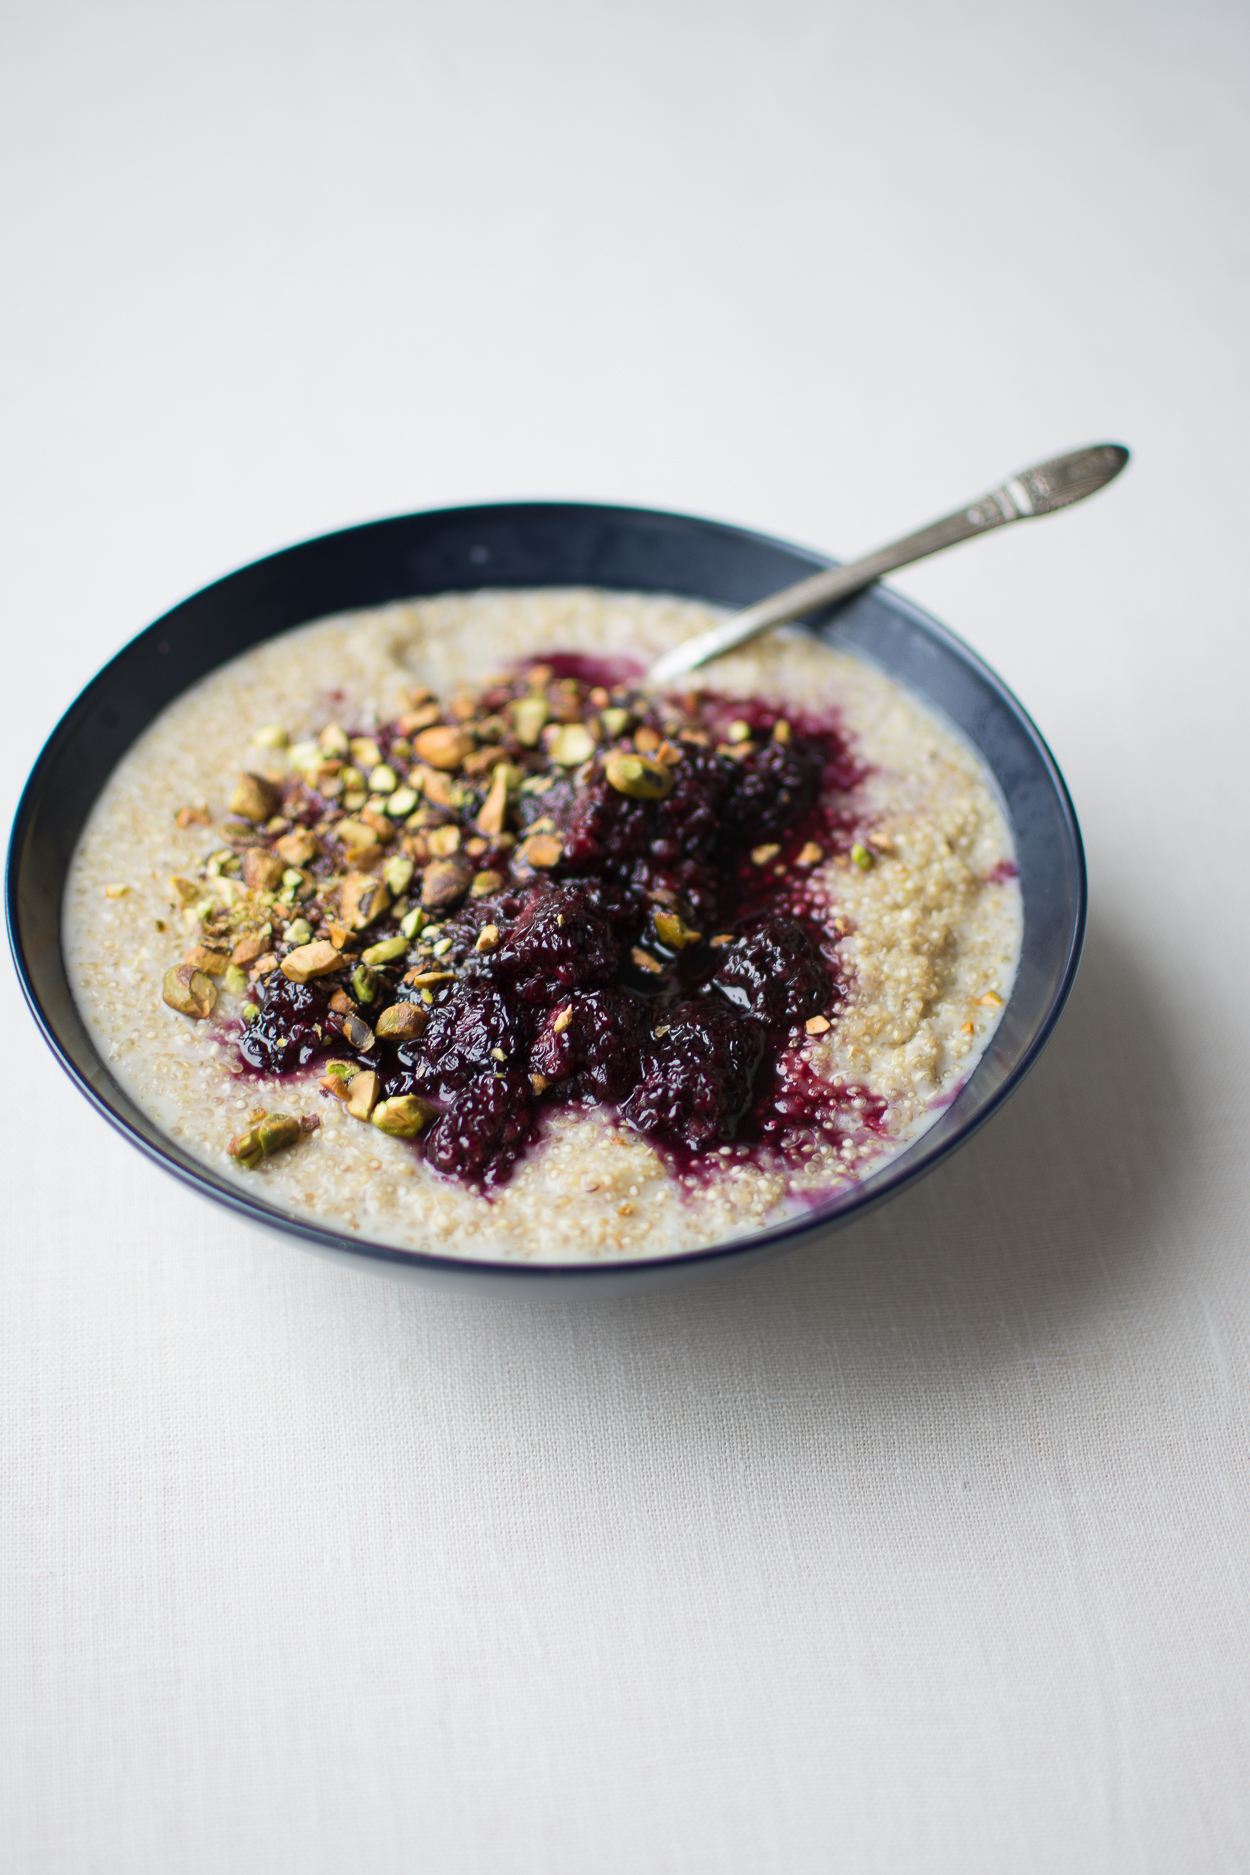 Tender, creamy sprouted quinoa porridge is dressed with a lightly sweetened blackberry sauce spiked with fragrant cardamom.